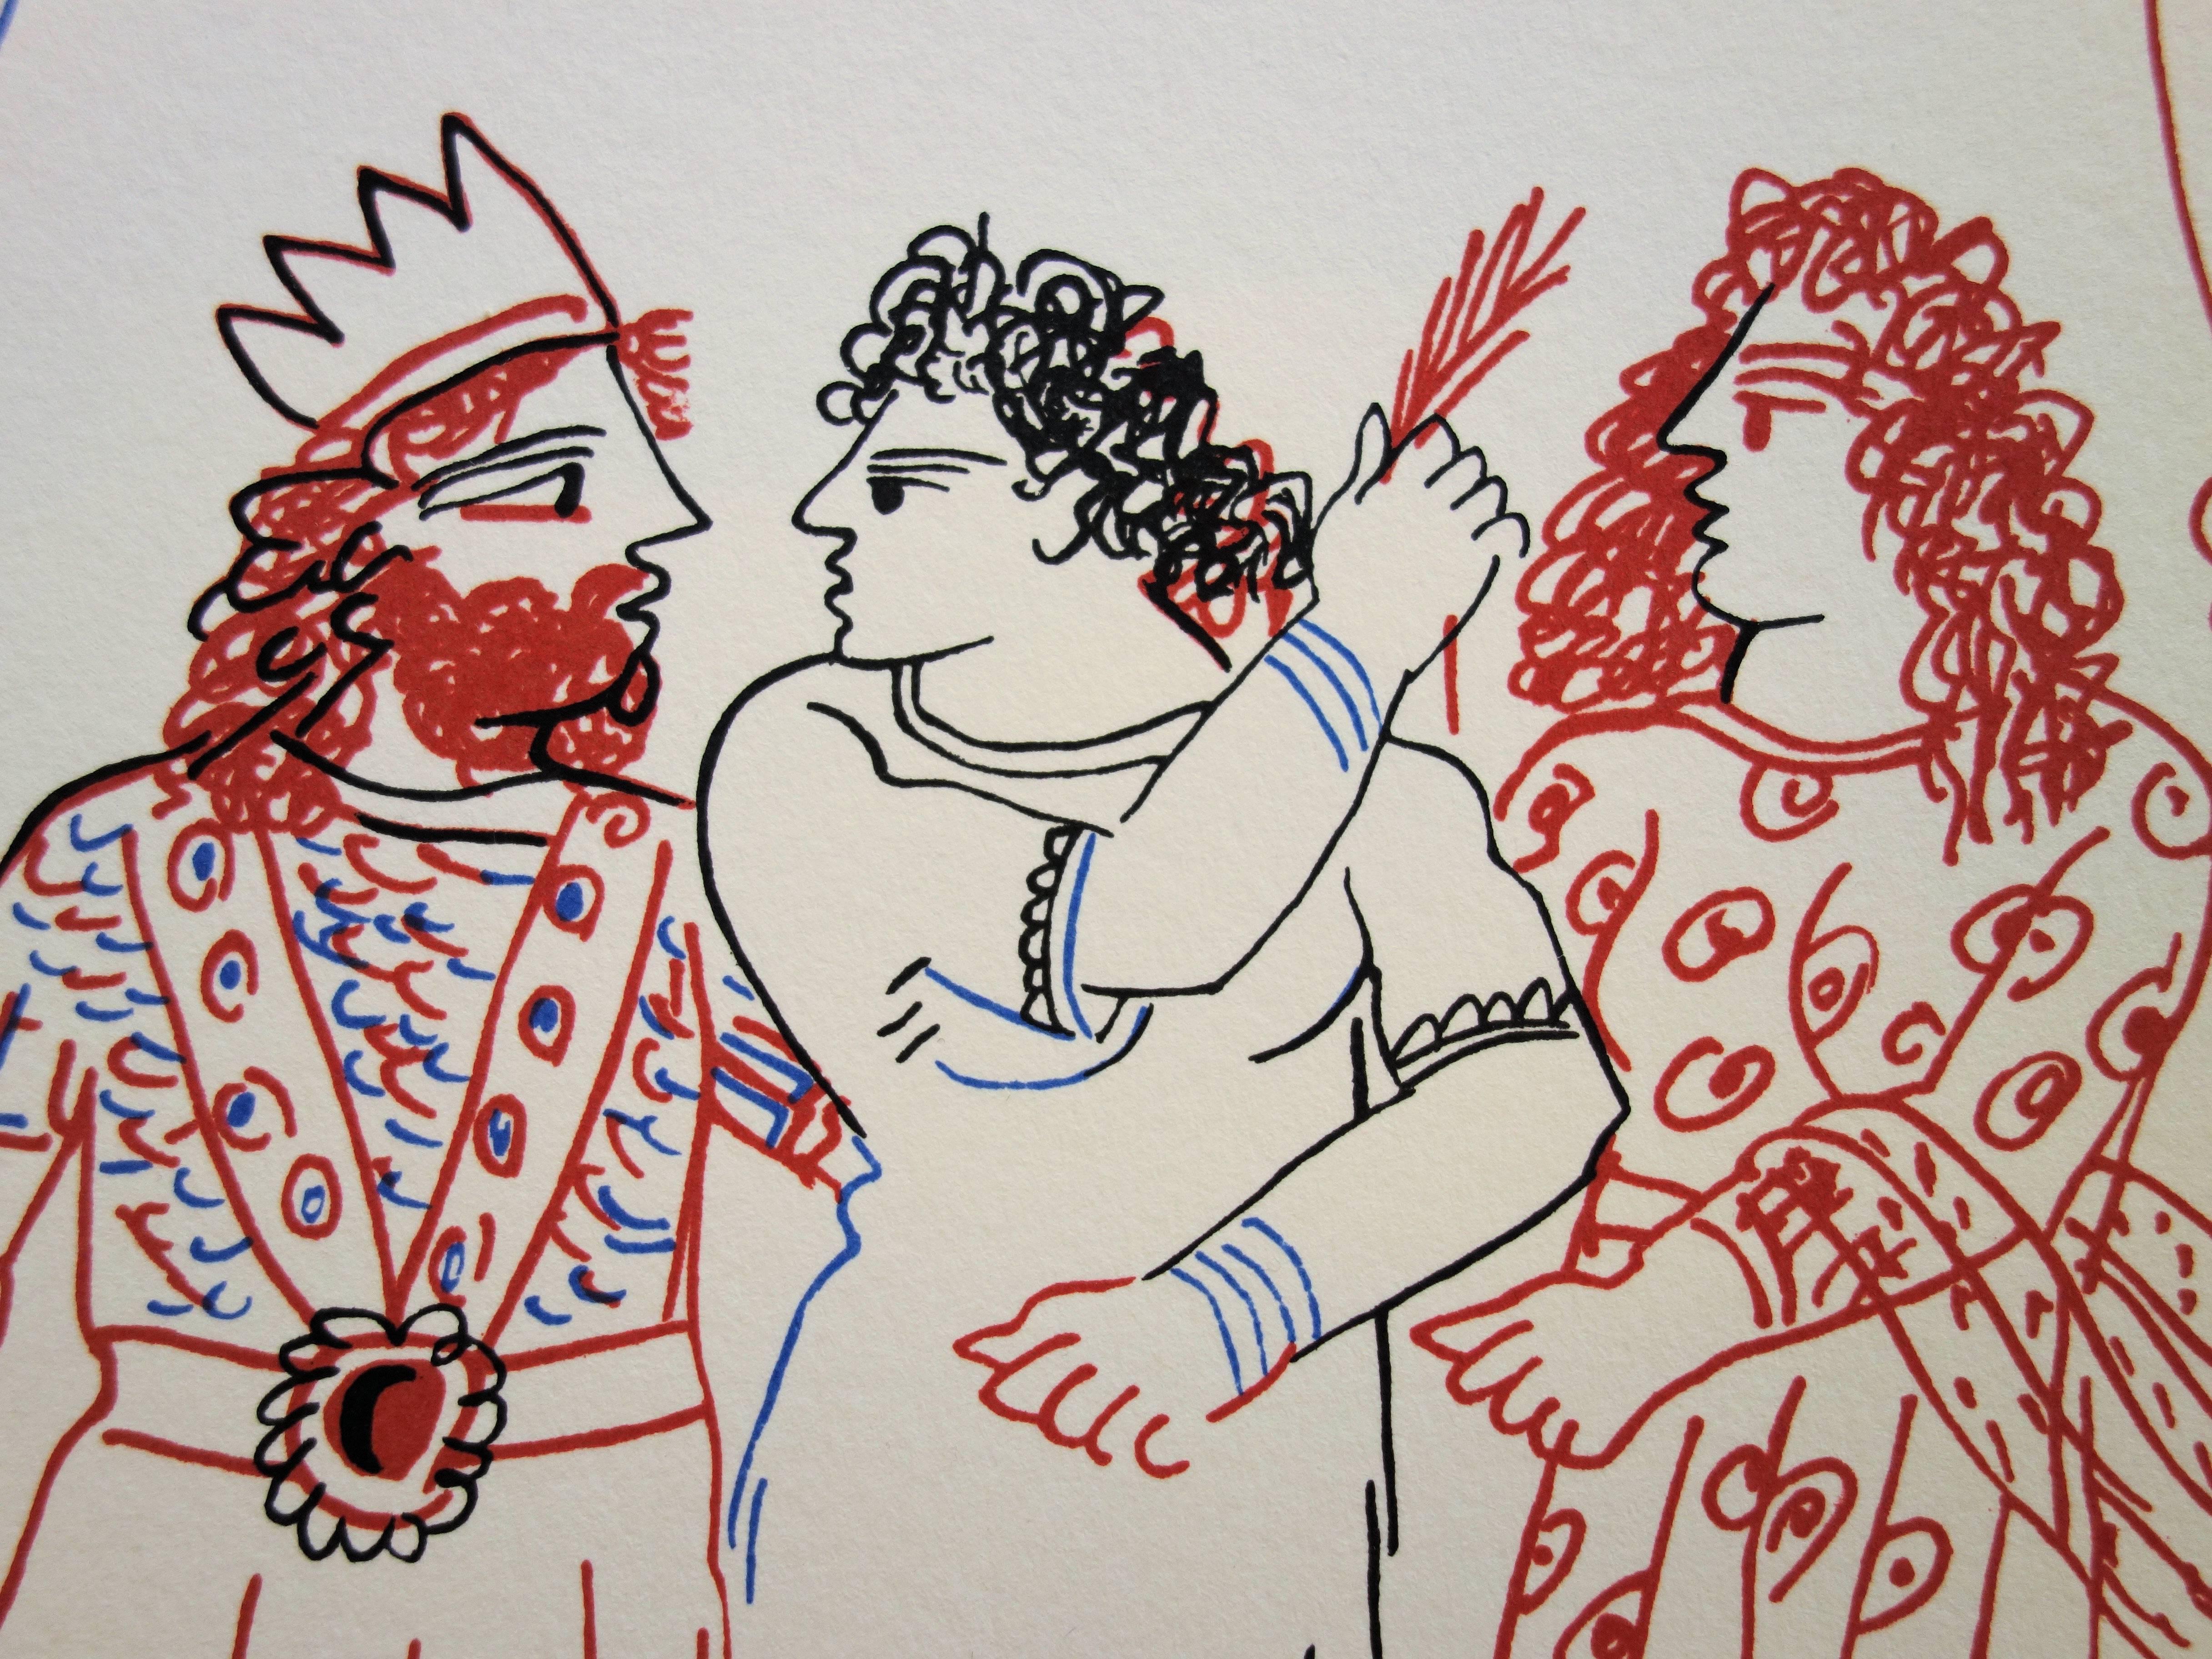 Alekos FASSIANOS
King and Greek Couple

Original lithograph
Handsigned in pencil
Numbered / 99 ex
On vellum 23 x 17 cm (c. 9 x 7 inch)

Excellent condition